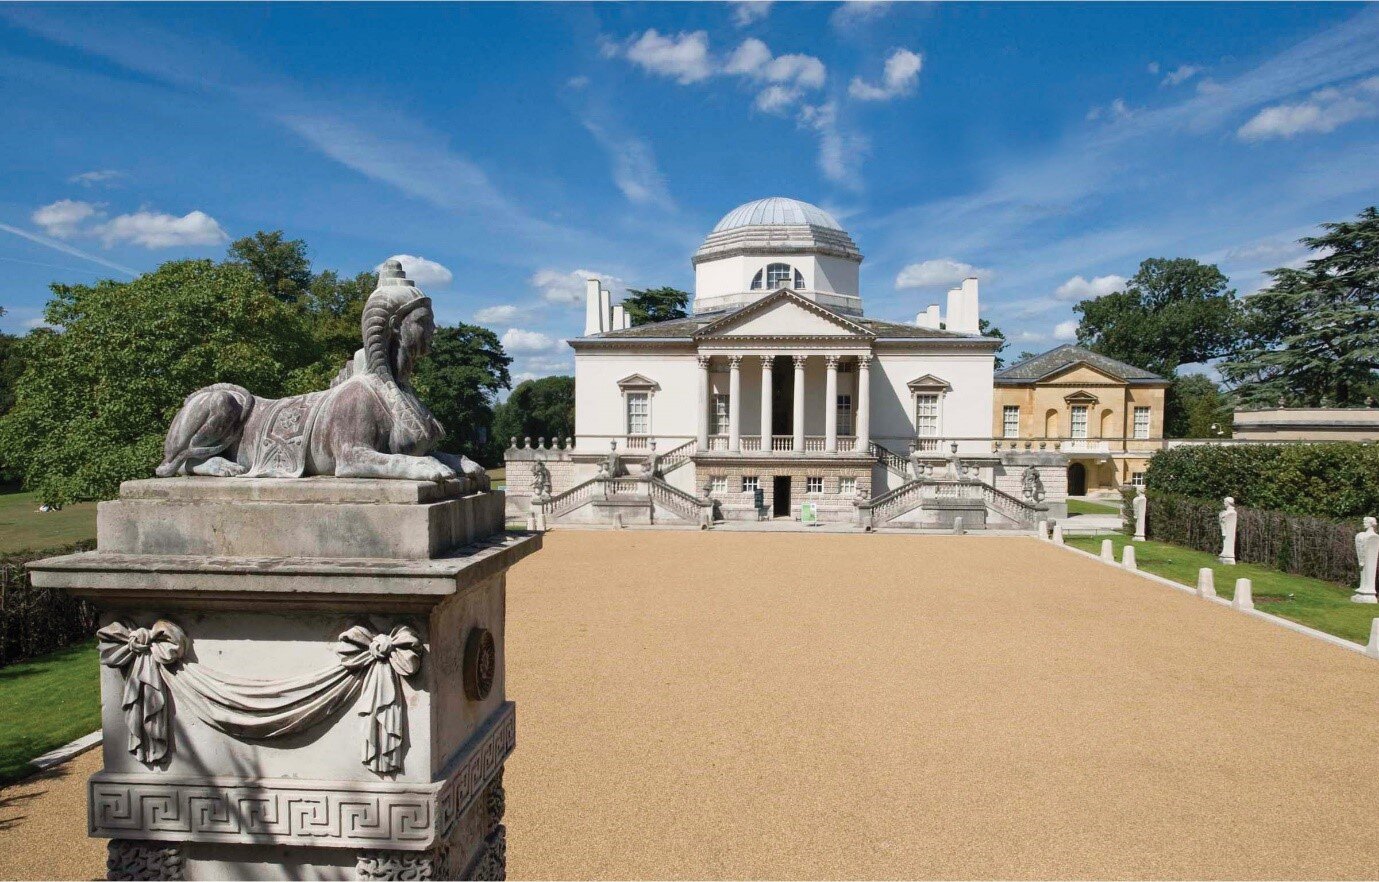 CH&Co agrees three year deal with Chiswick House and Gardens worth £3m